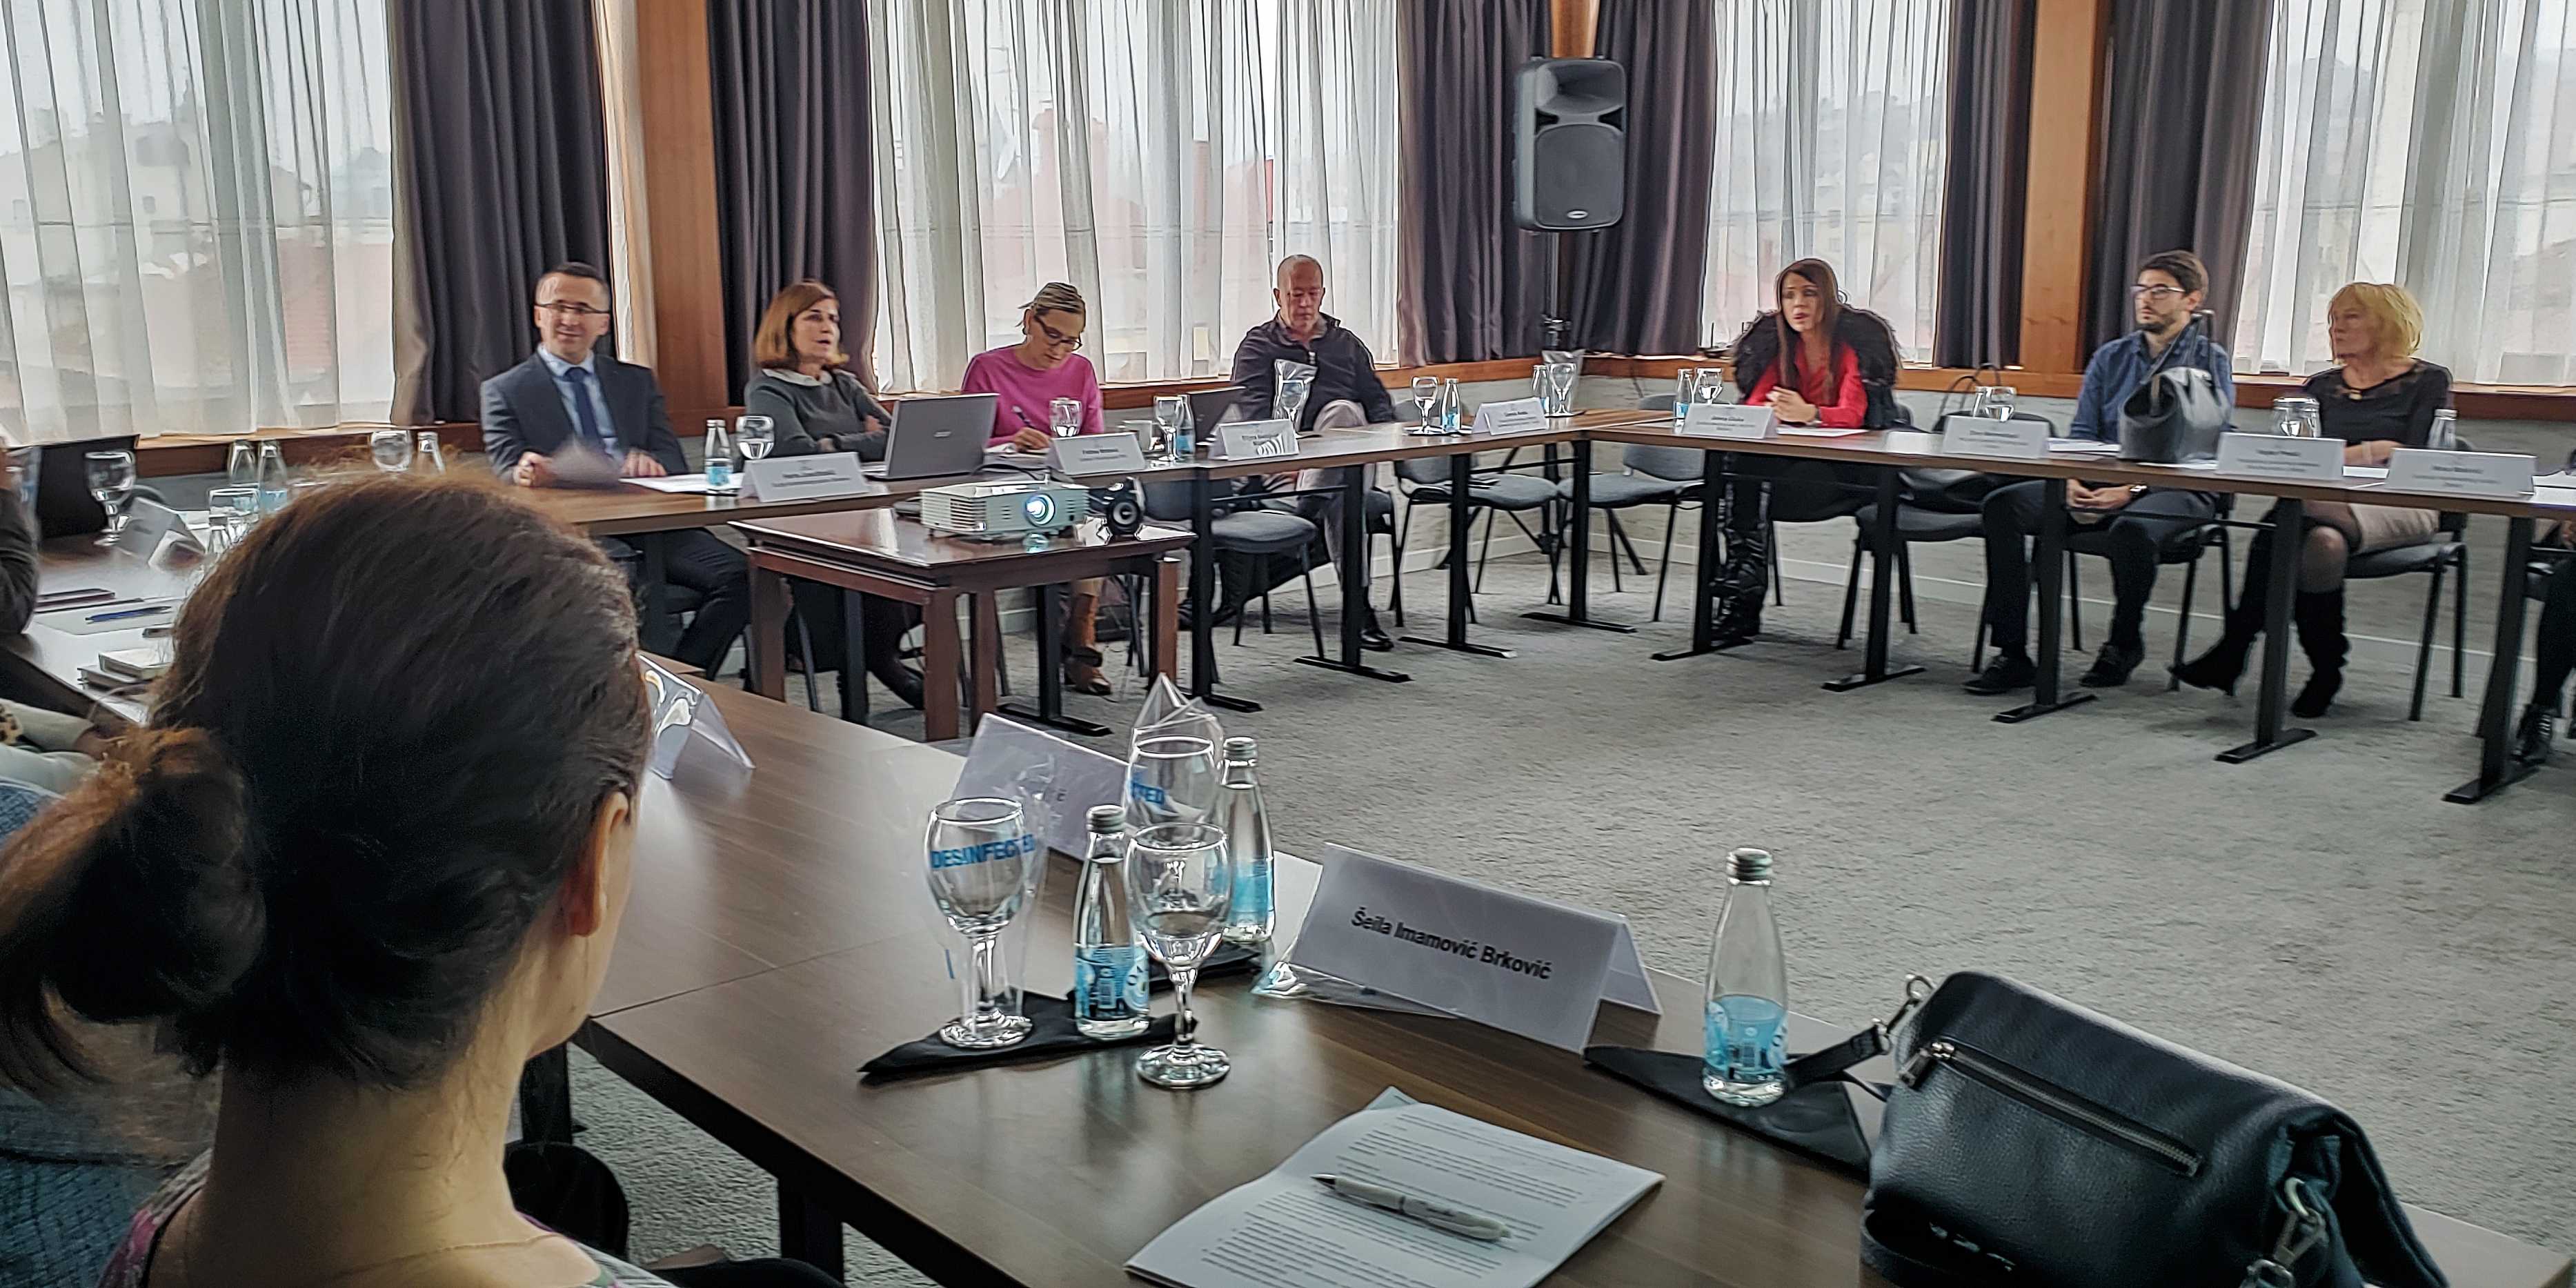 Report and discussion on the need for establishment of case law departments at second-instance courts in Bosnia and Herzegovina